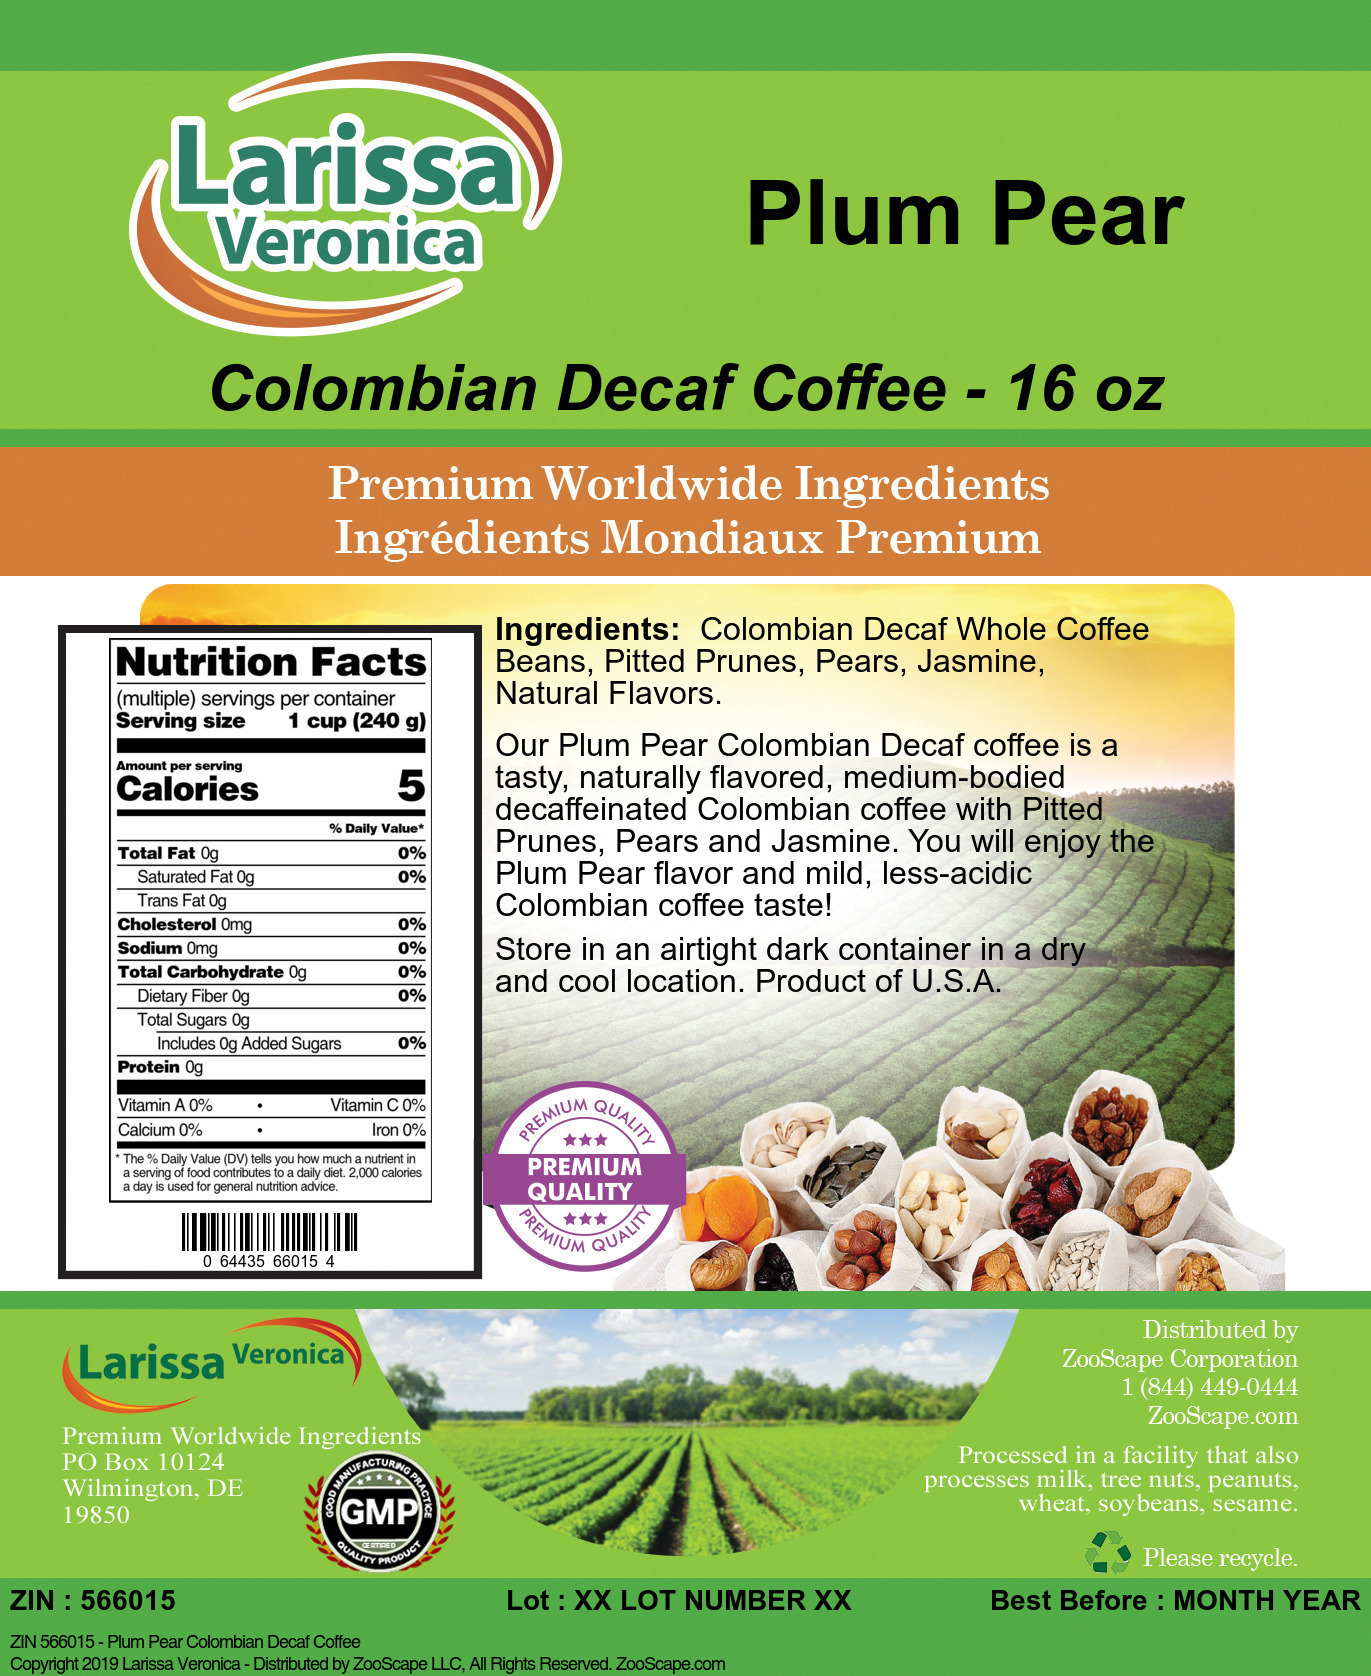 Plum Pear Colombian Decaf Coffee - Label